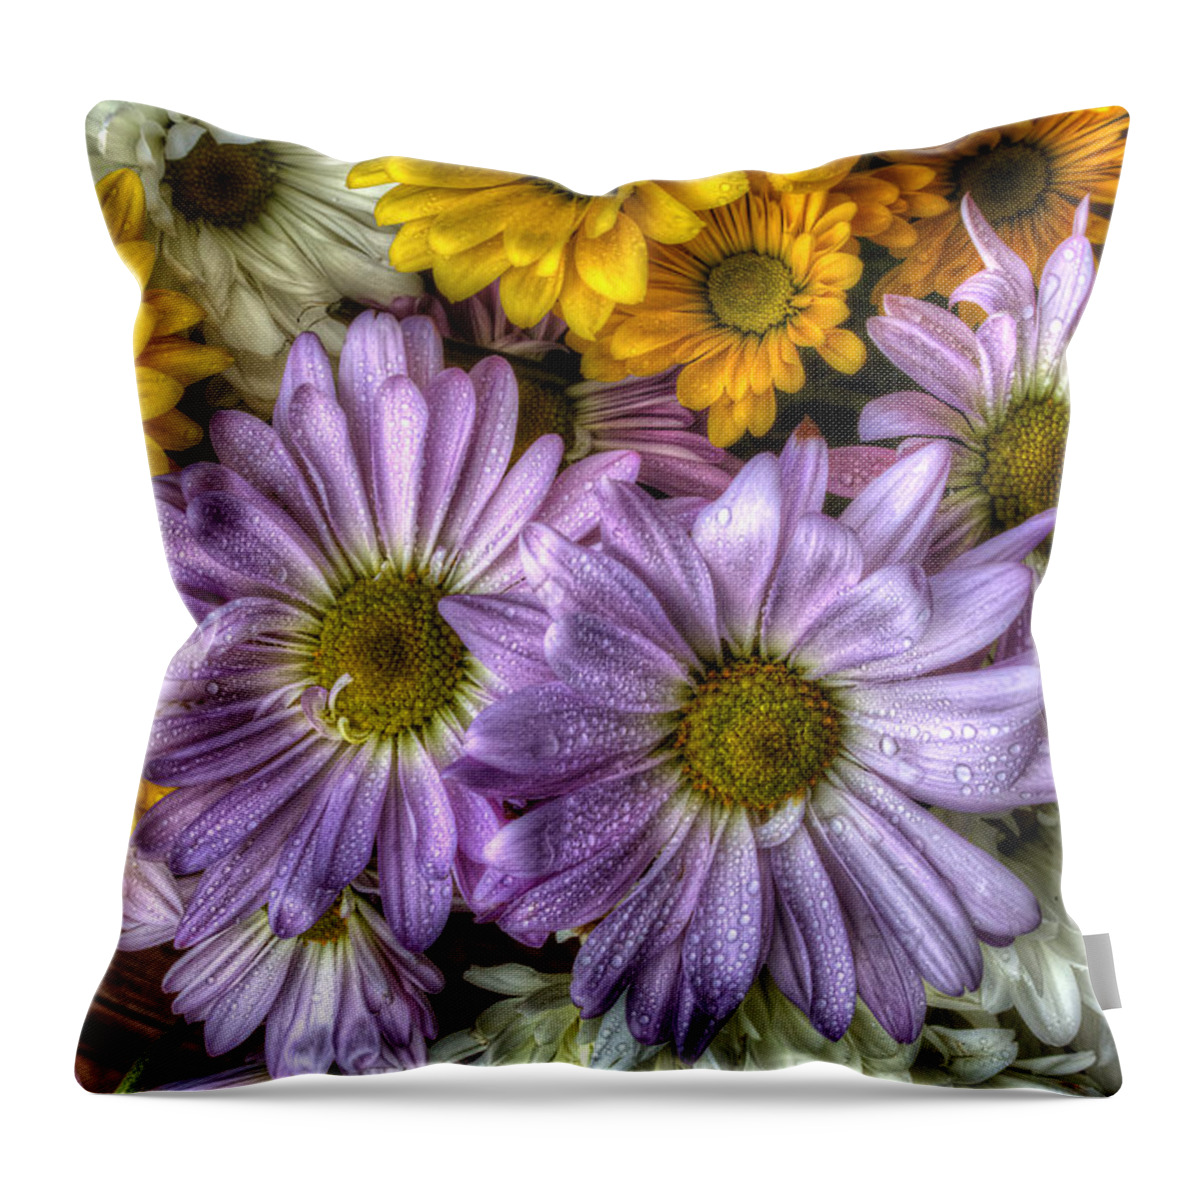 Daisies Throw Pillow featuring the photograph We Need To Be Together by Mike Eingle